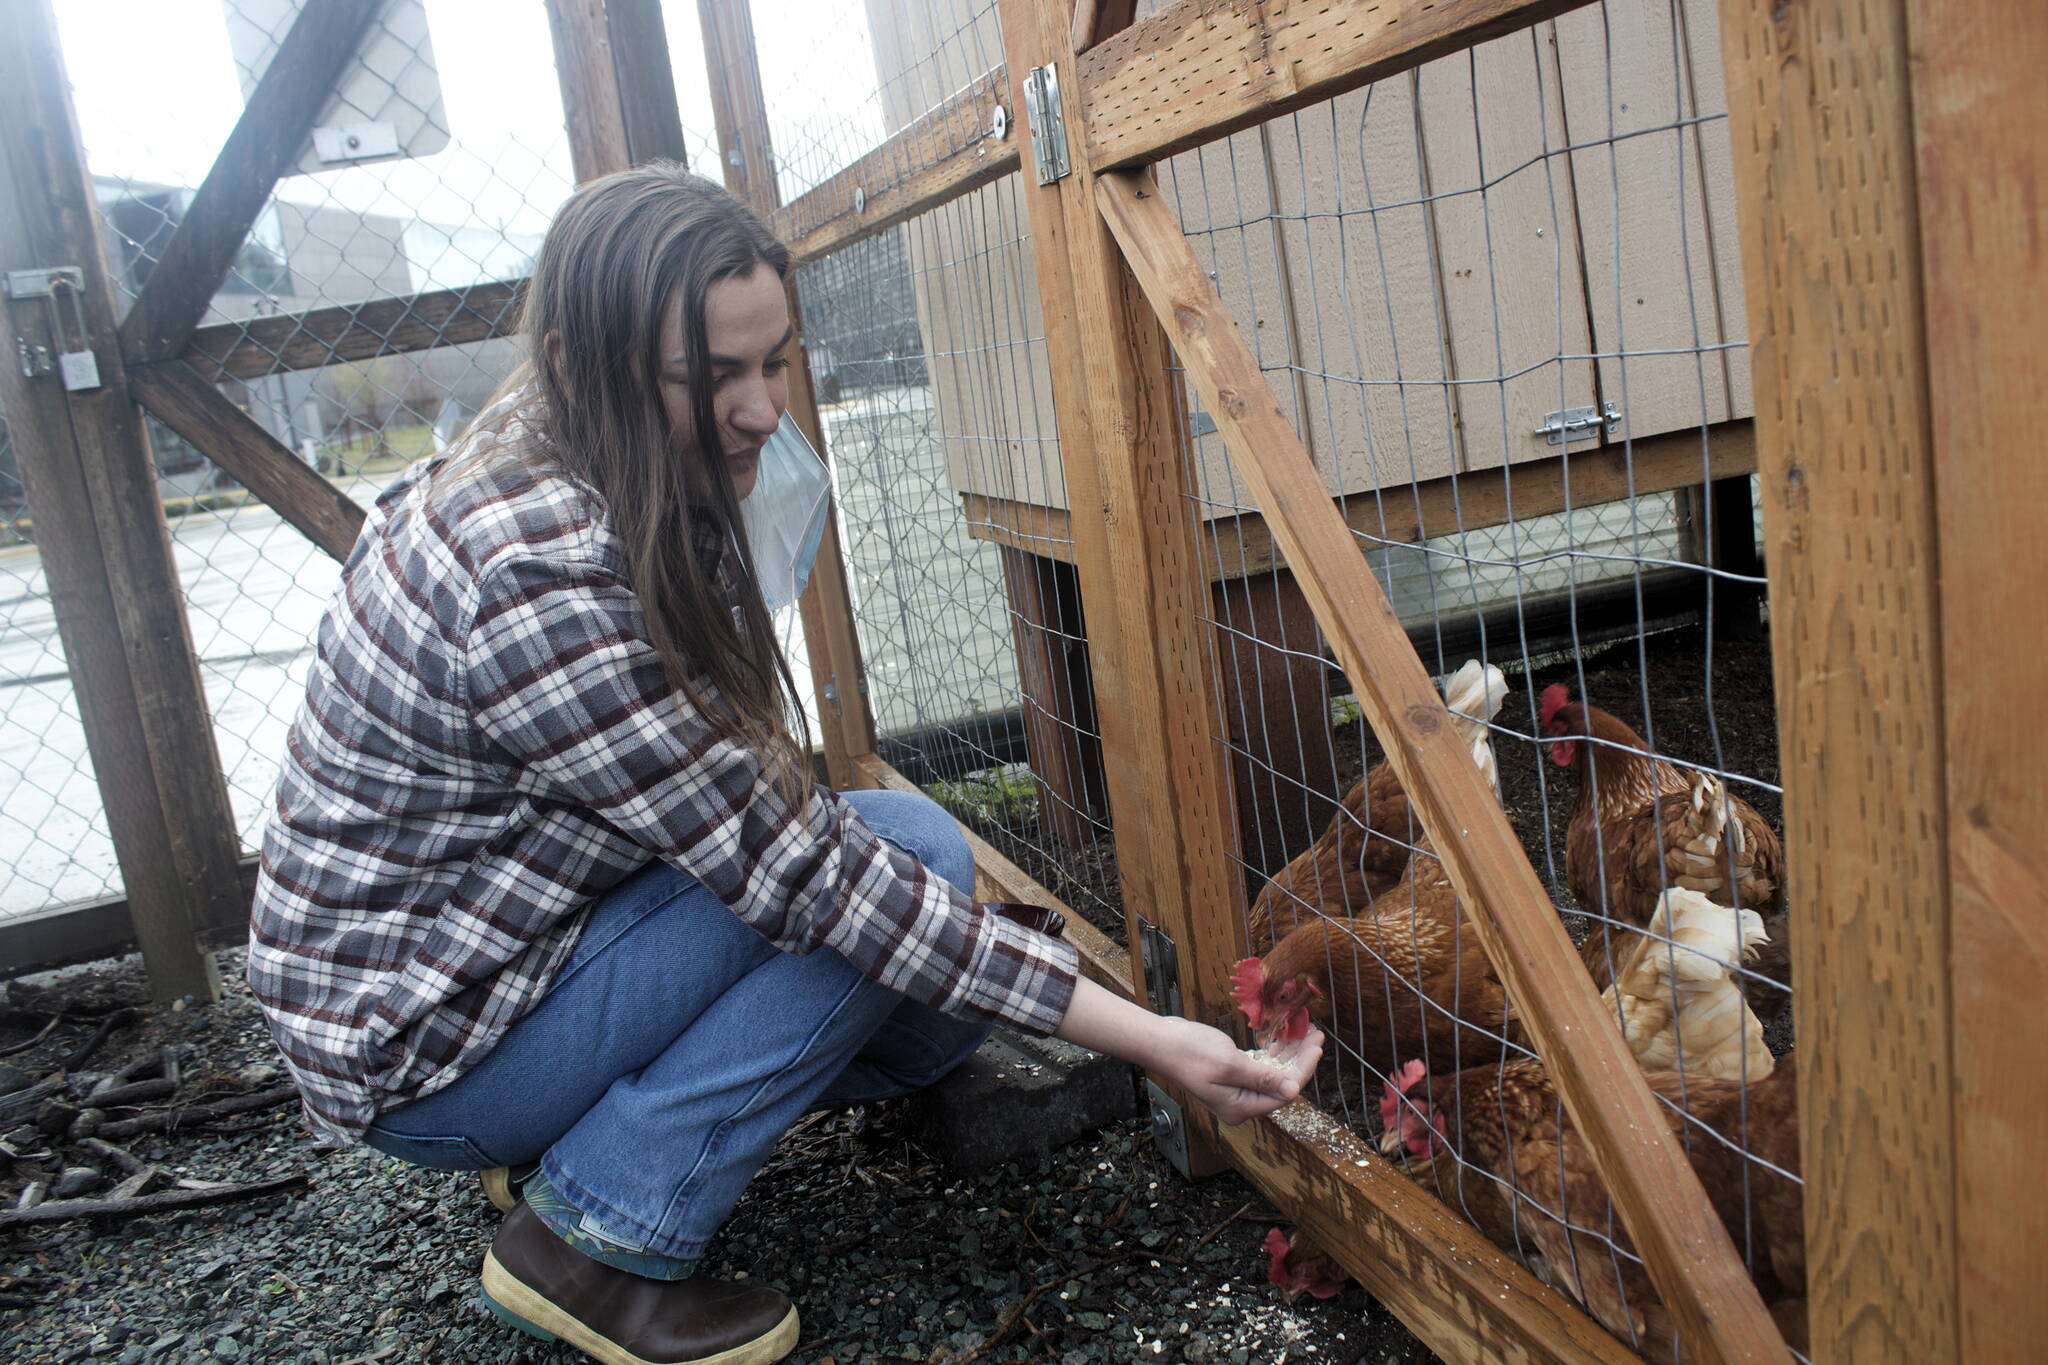 Anne Bonino-Britsch, a volunteer, feeds chickens at the Zach Gordon Youth Center. The first case of bird flu tied to a recent outbreak that's killed millions of turkeys and chickens was confirmed in Alaska last week, but local poultry owners said while they're being cautious, they aren't overly concerned. (Mark Sabbatini / Juneau Empire)